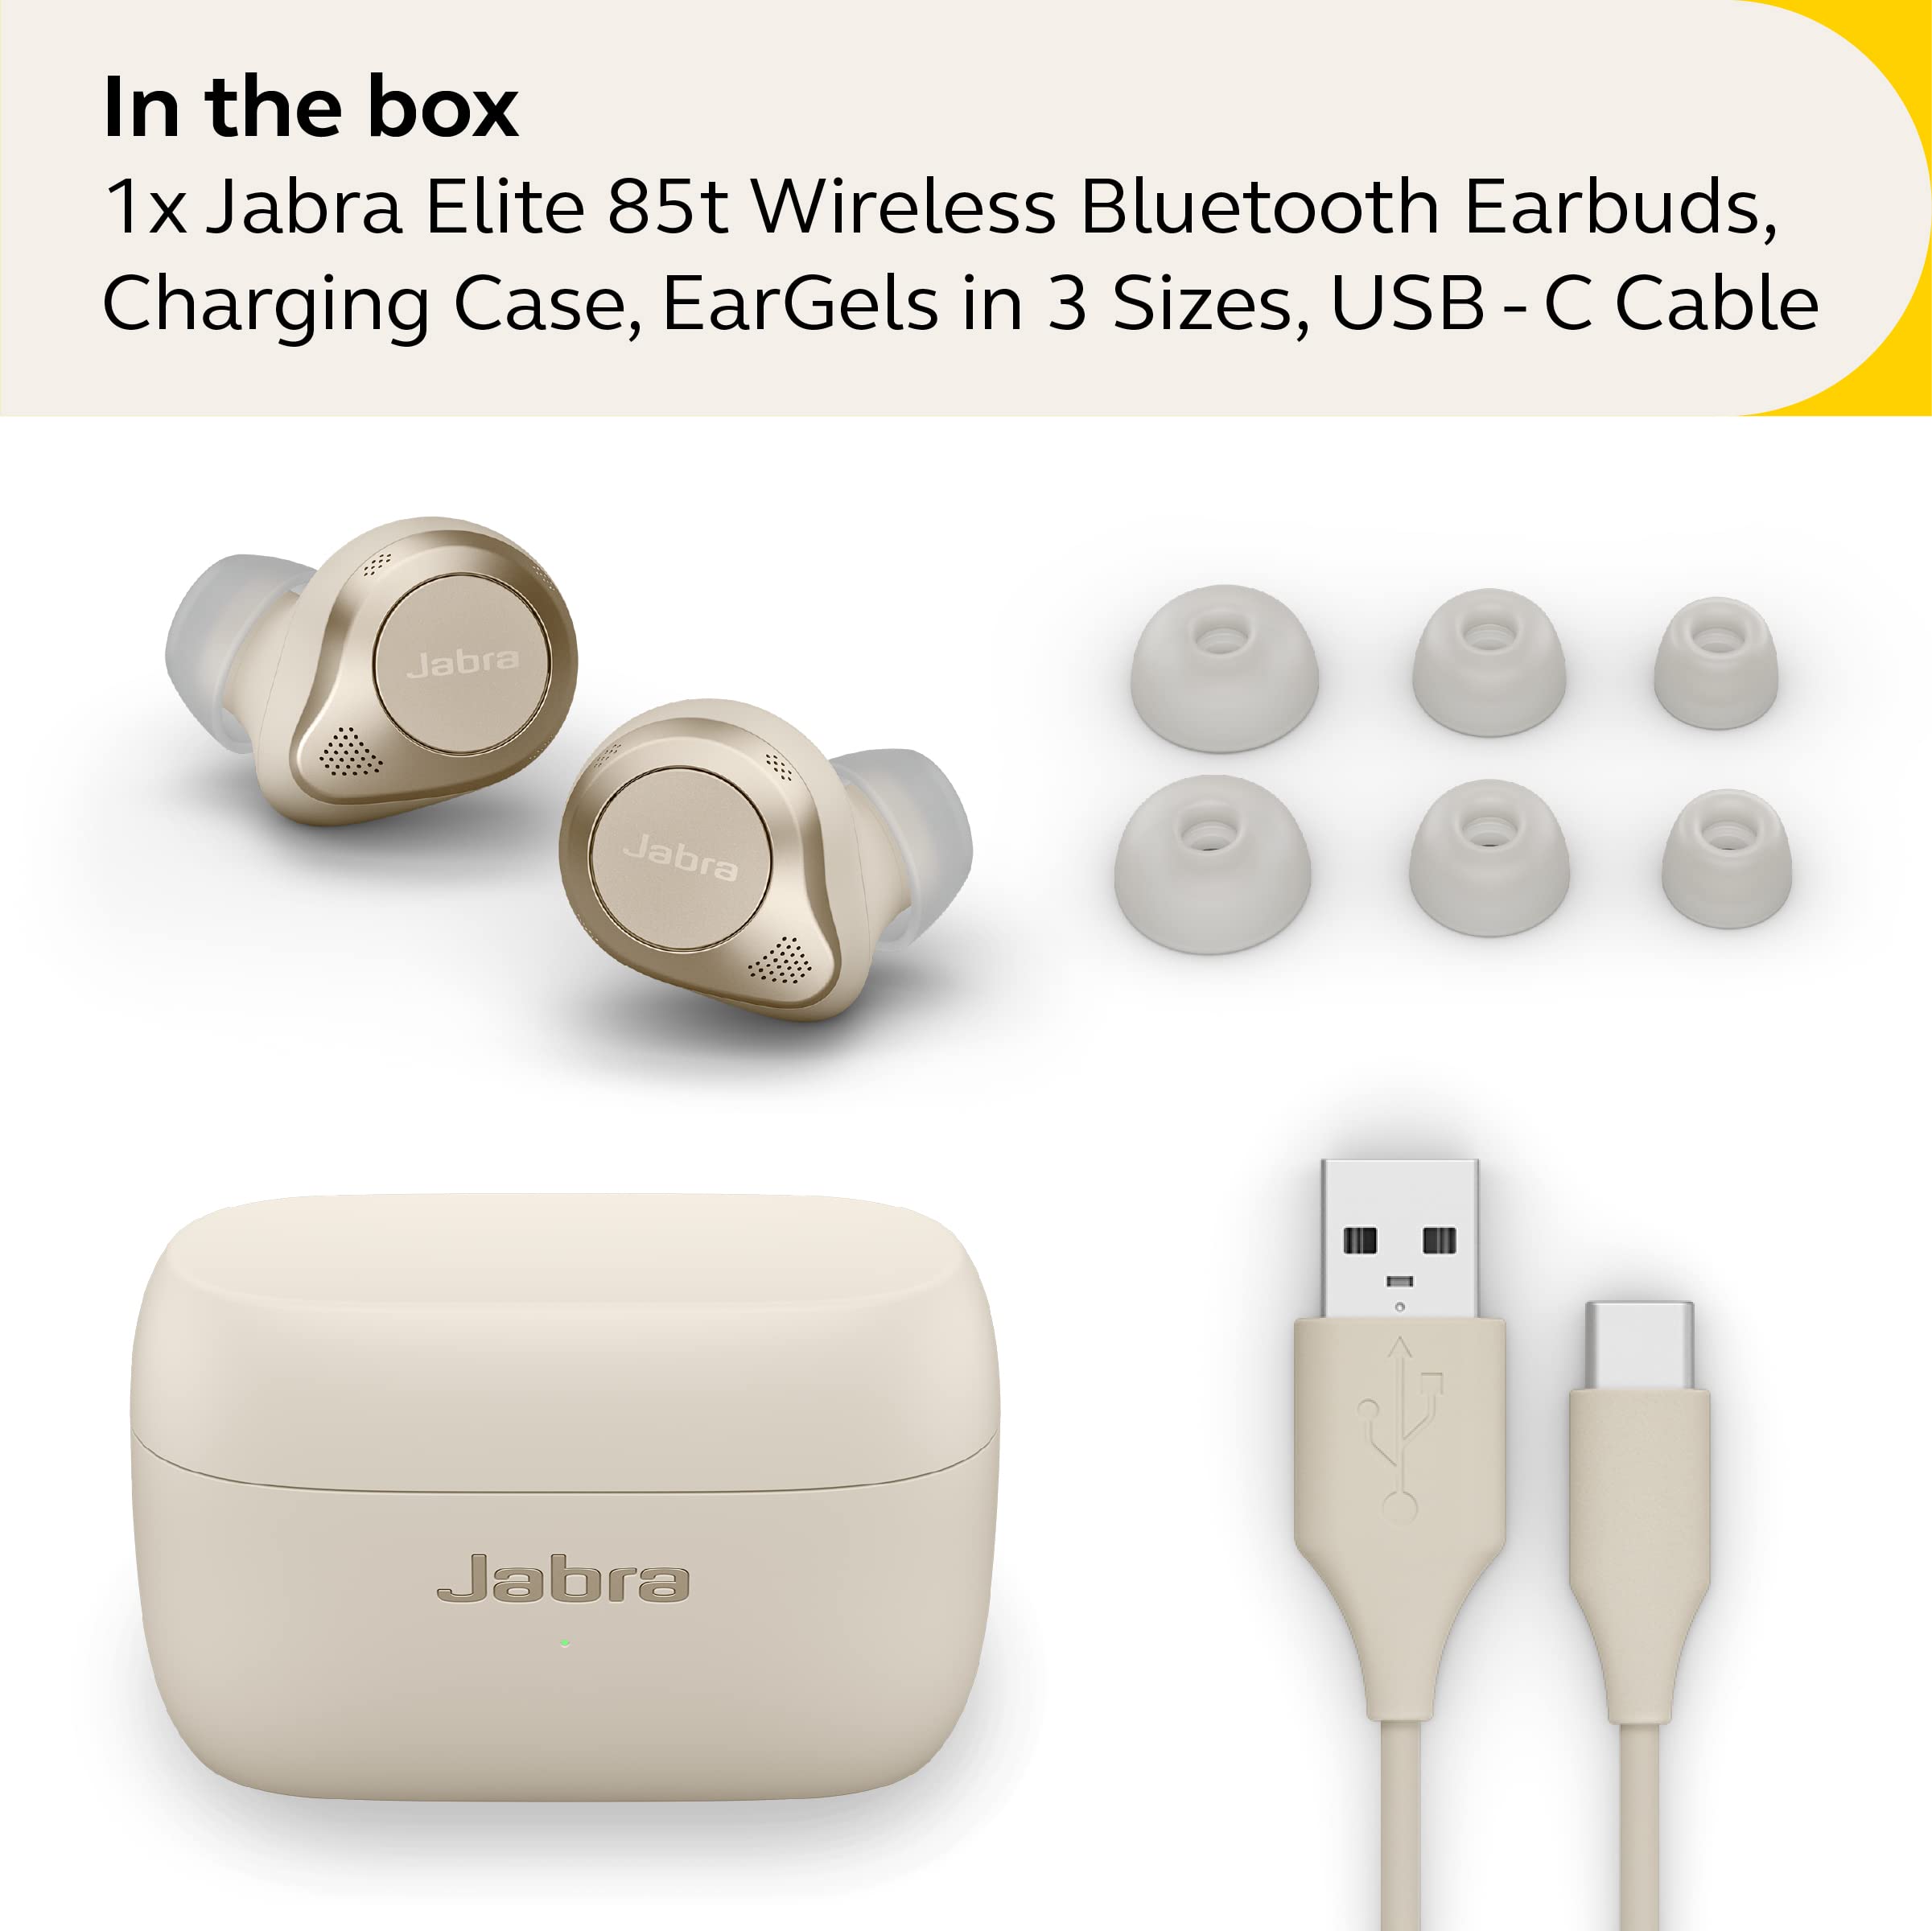 Jabra Elite 85t True Wireless Bluetooth Earbuds, Gold Beige – Advanced Noise-Cancelling Earbuds with Charging Case for Calls & Music – Wireless Earbuds with Superior Sound & Premium Comfort, 12